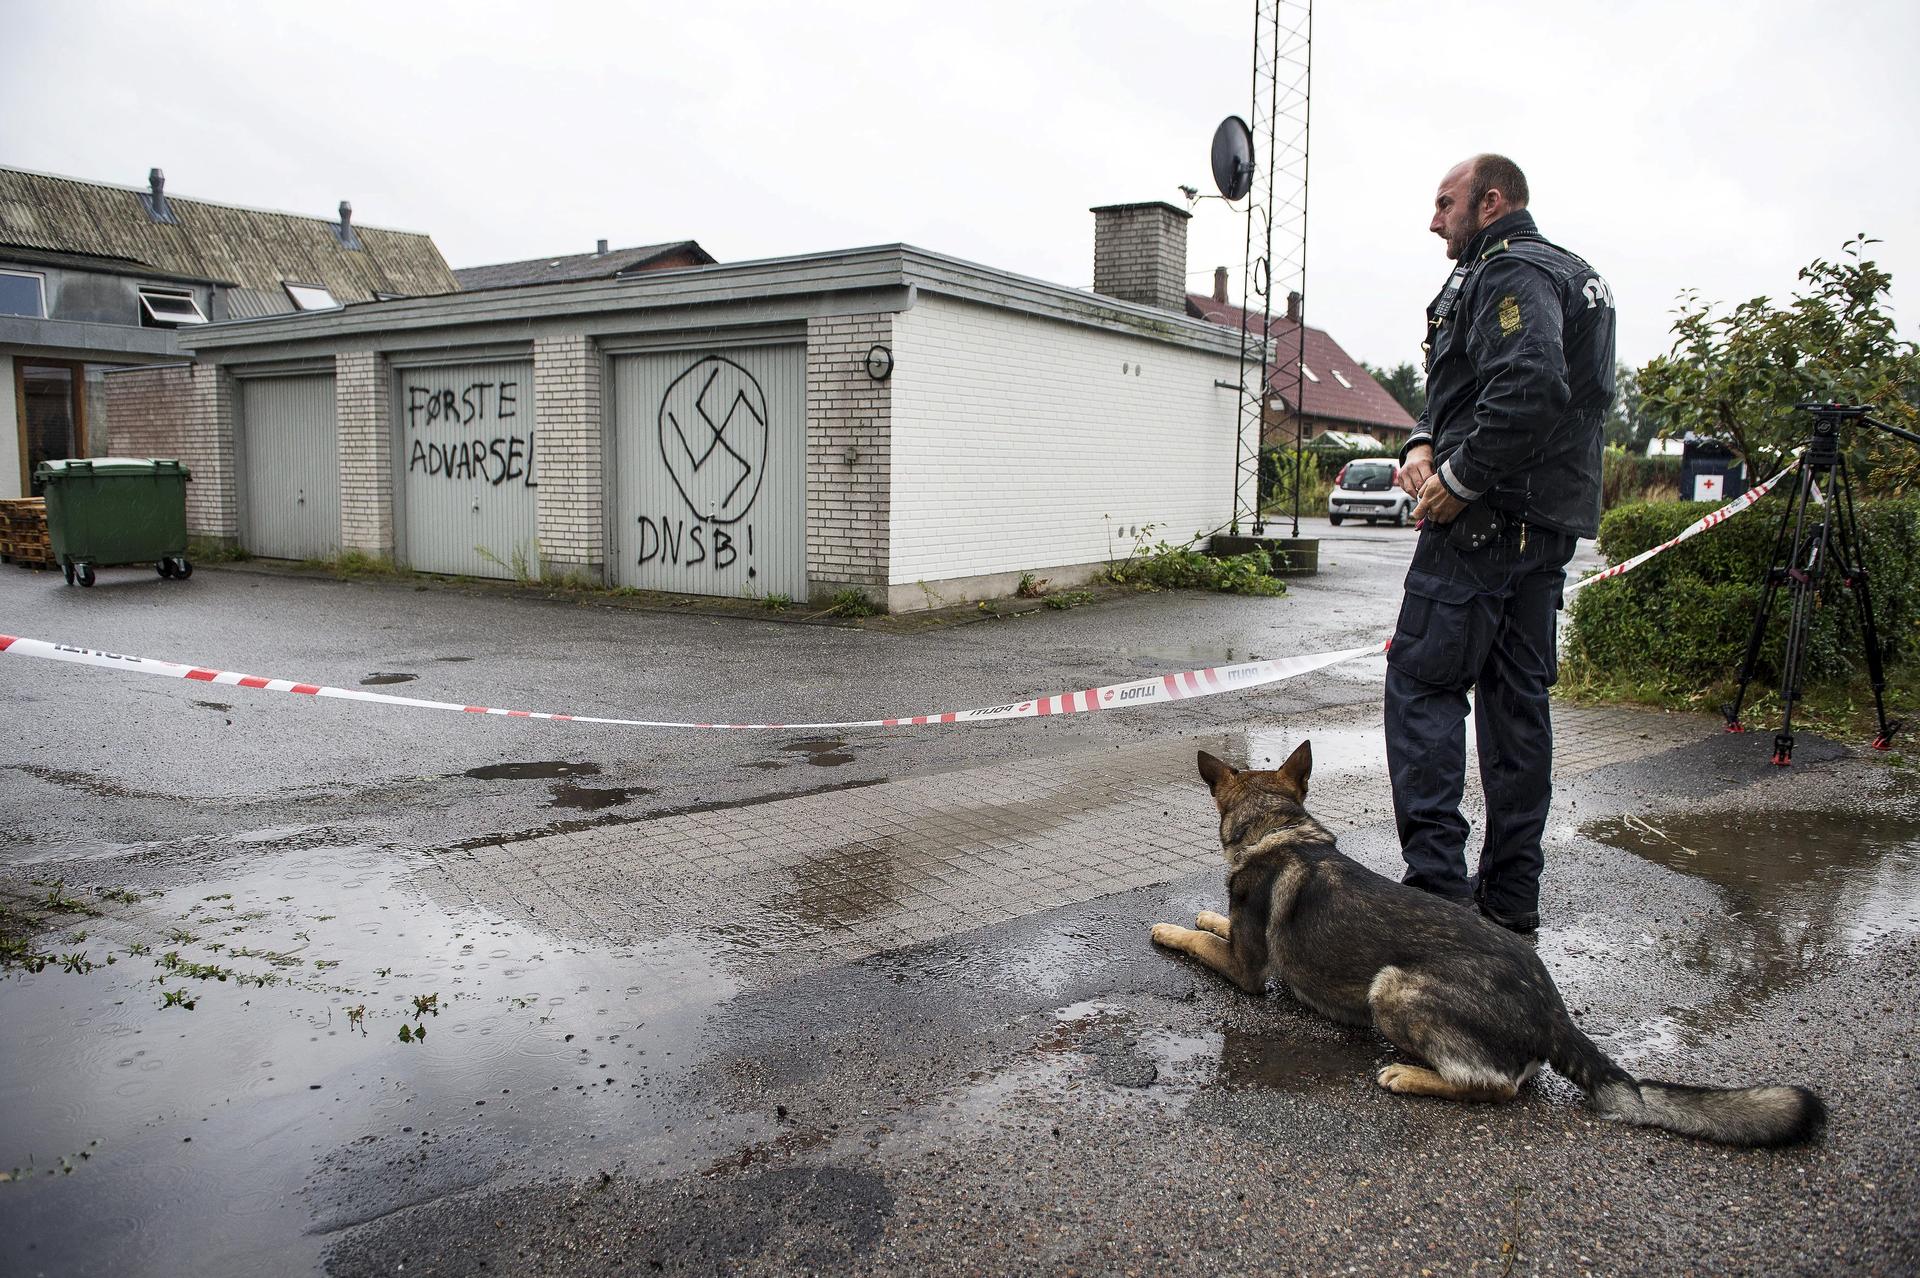 A policeman stands guard in front of the Red Cross asylum center in Lyngbygaard in Trustrup, in the west of Denmark, August 27, 2015.